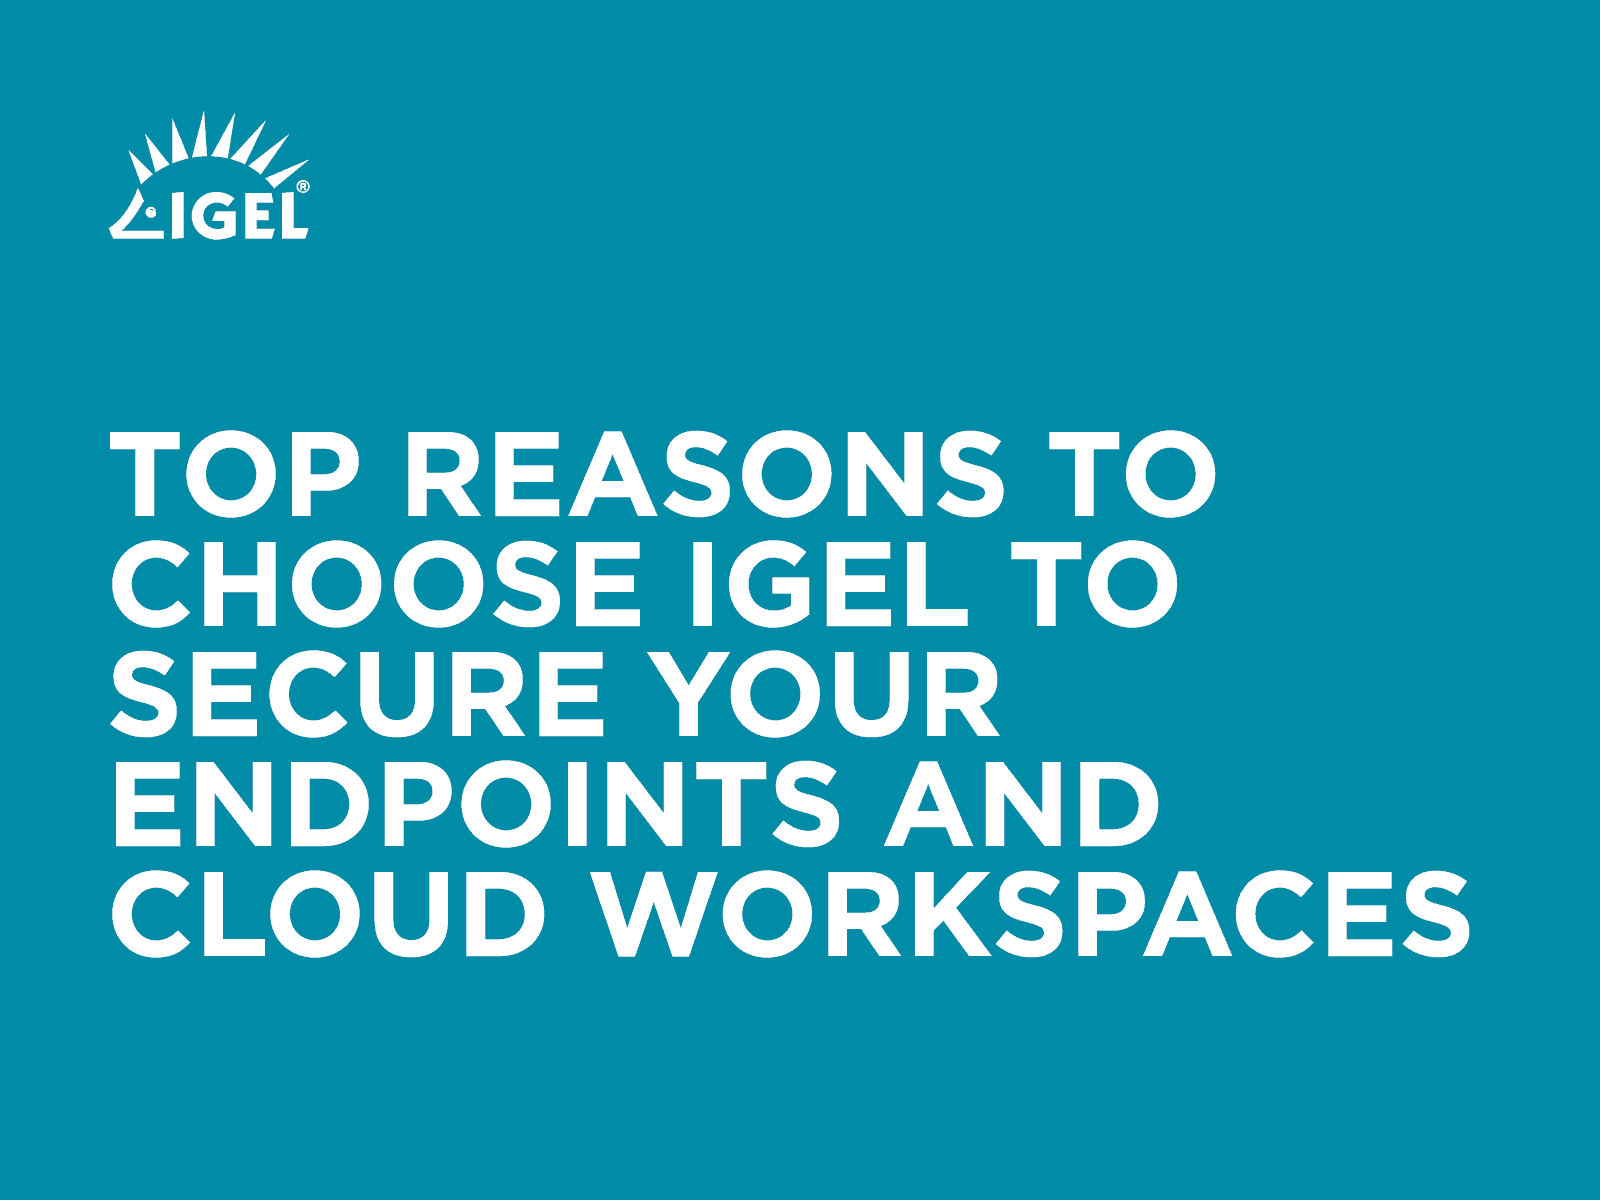 Top Reasons to Choose IGEL to Secure Your Endpoints and Cloud Workspaces